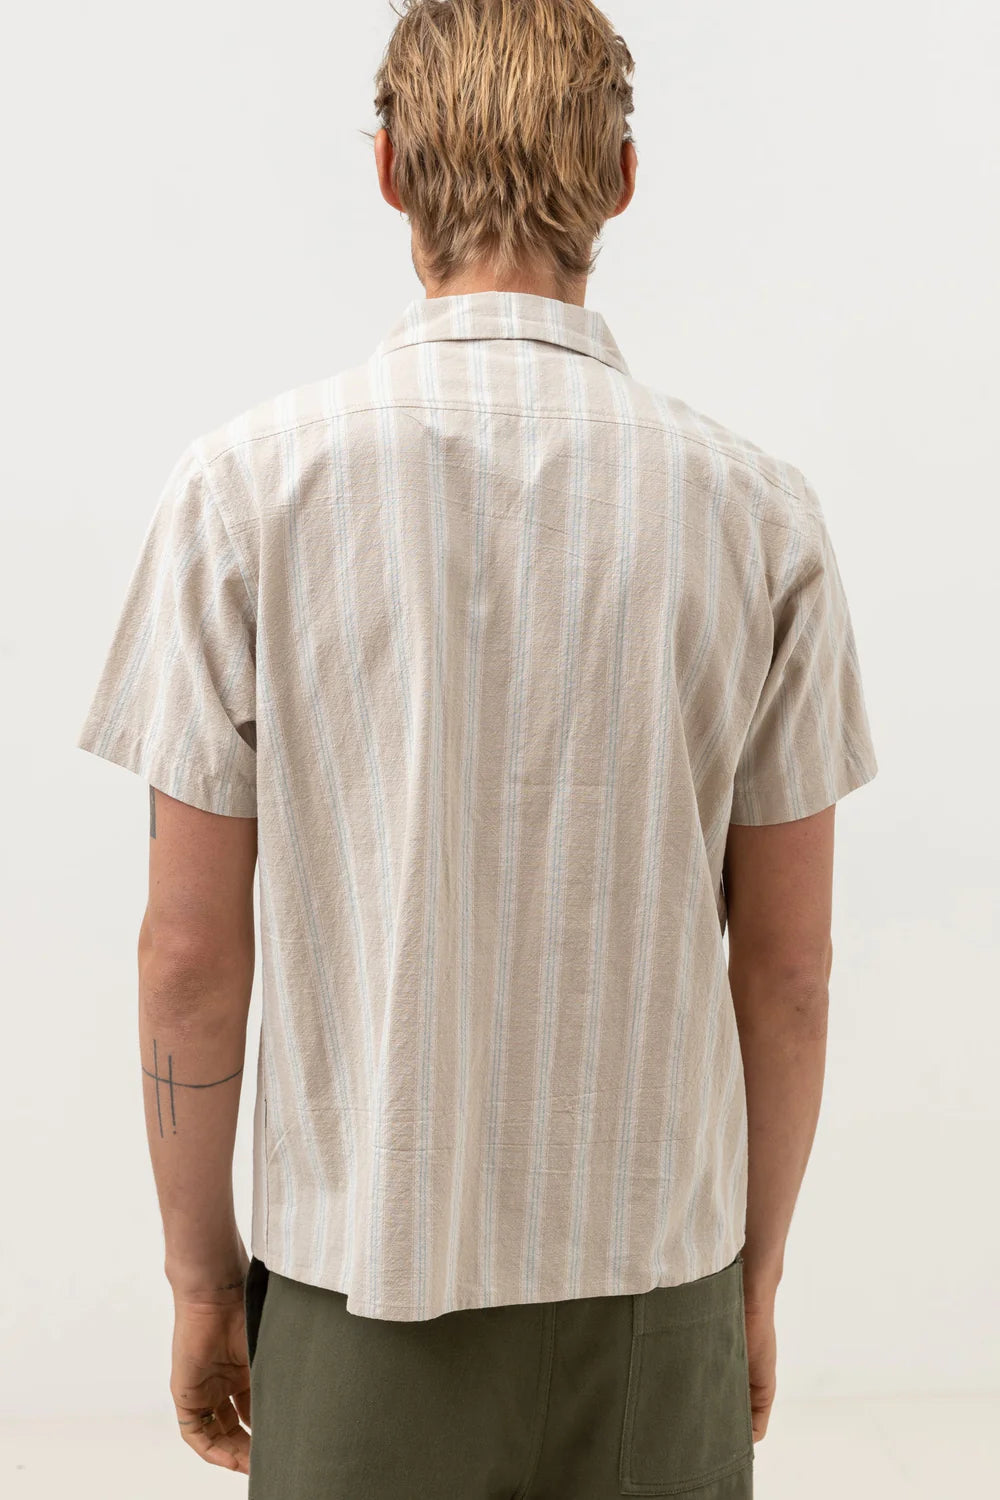 Rhythm Vacation Stripe SS Shirt Sand | Collective Request 